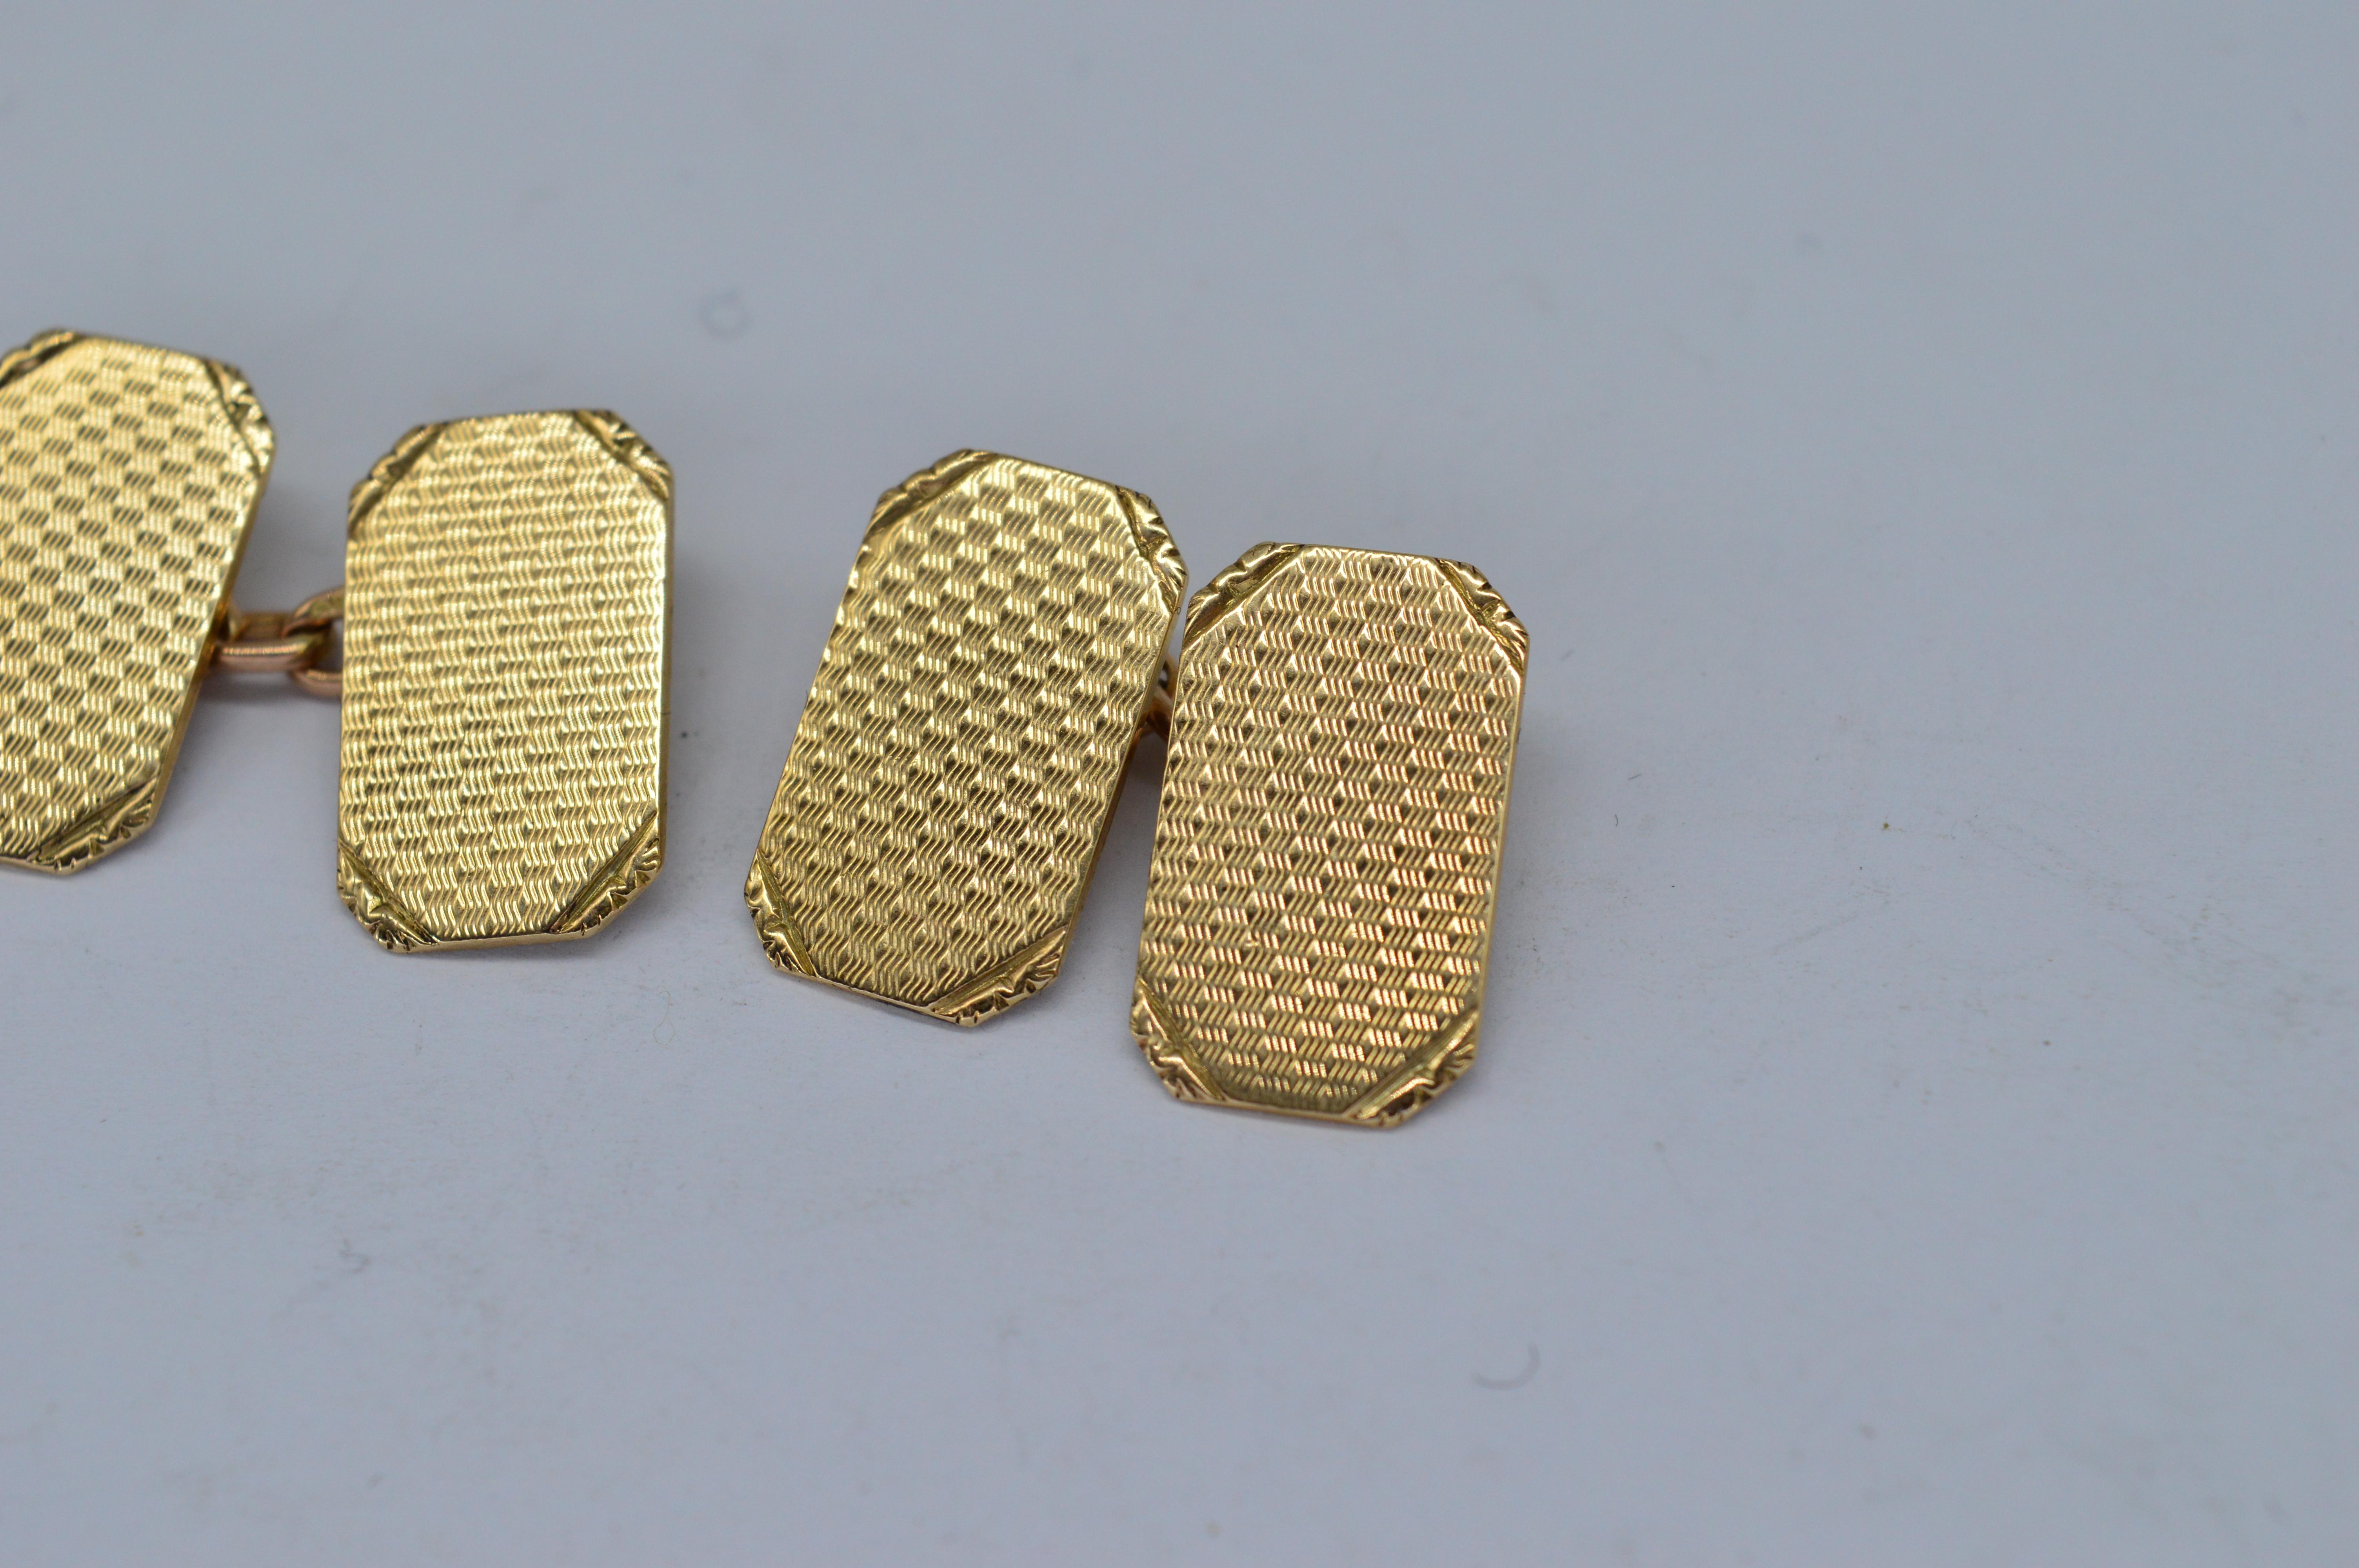 A set of 9ct yellow gold cufflinks made by Deakin and Francis

Featuring a classic engine turned design

6.80g

We have sold to the set of Hit shows like Peaky Blinders and Outlander as well as to Buckingham Palace so our items are truly fit for